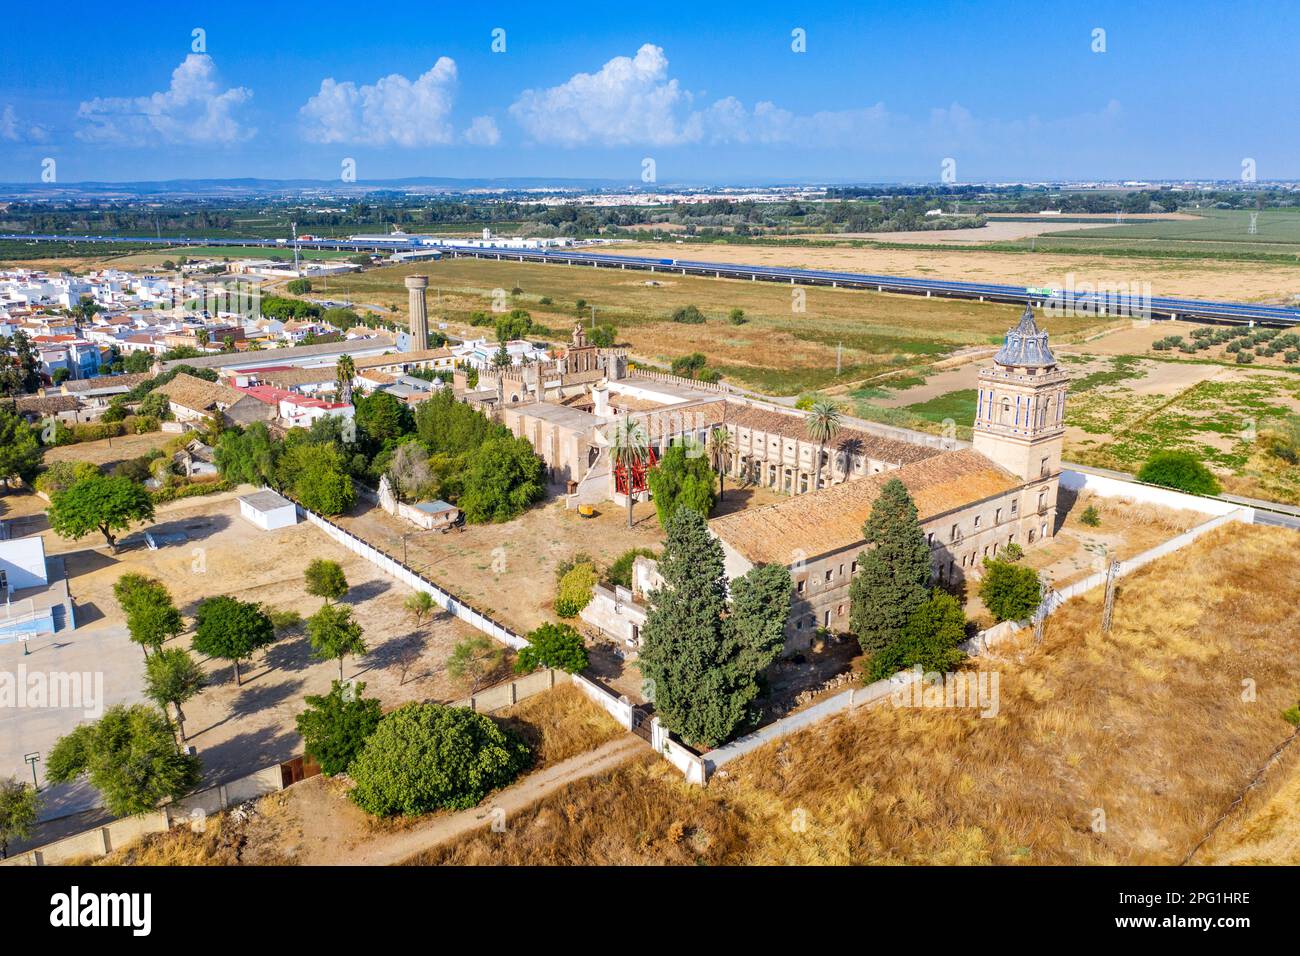 Aerial view of San Isidoro del Campo monastery, Santiponce, Seville Spain.   The Monastery of San Isidoro del Campo, founded in 1301 by Alonso Pérez d Stock Photo